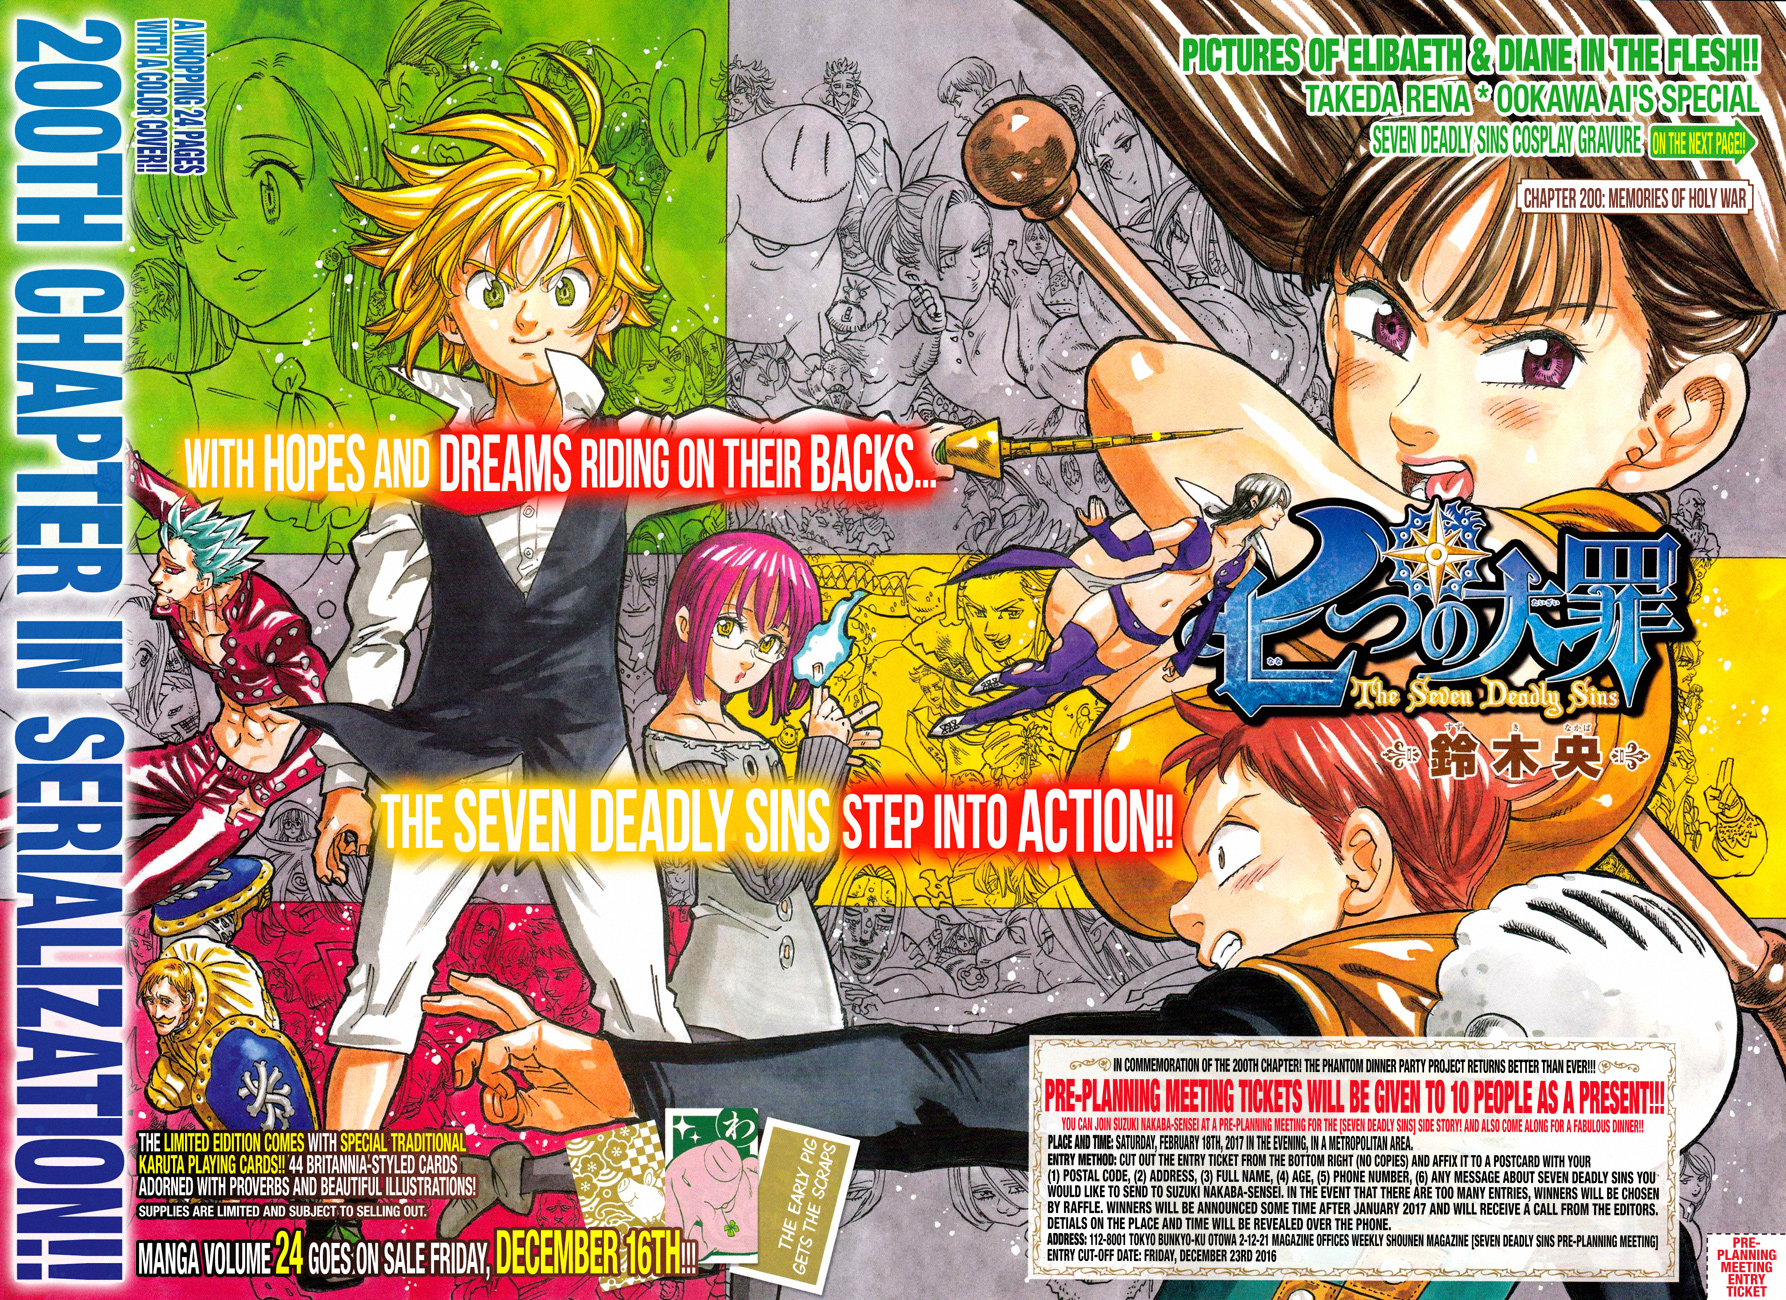 The Seven Deadly Sins 200